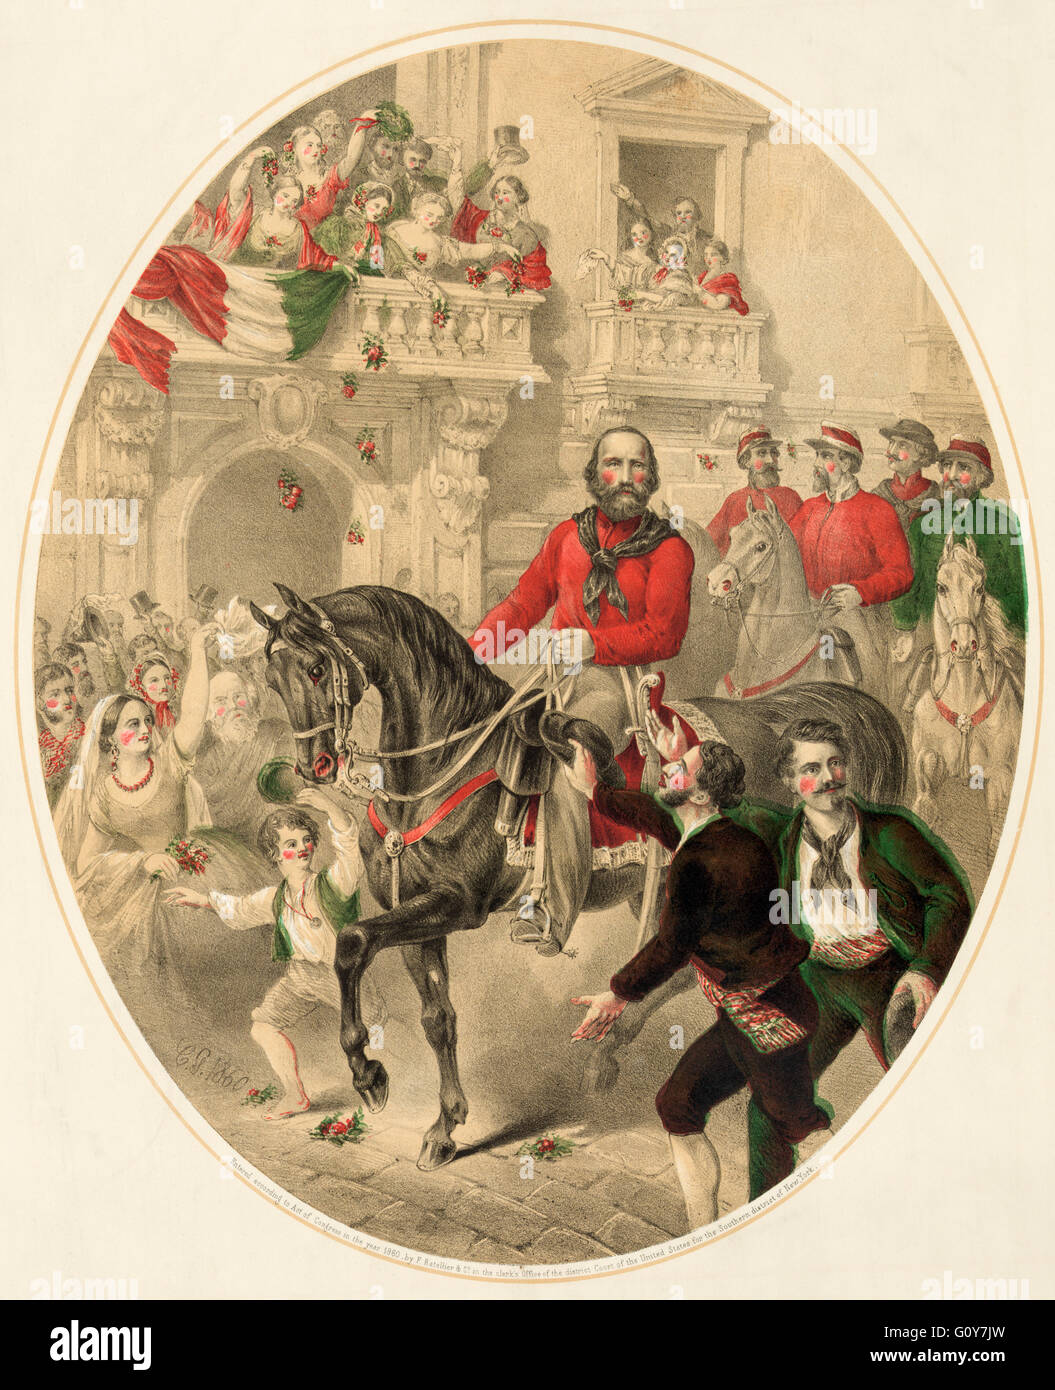 Romanticized version of Garibaldi entering Naples on September 7, 1860.  In fact, Garibaldi entered Naples by train.  After a contemporary chromolithograph published in the United States.  Giuseppe Garibaldi, 1807 - 1882. 19th century Italian military and political figure of the Risorgimento. Stock Photo